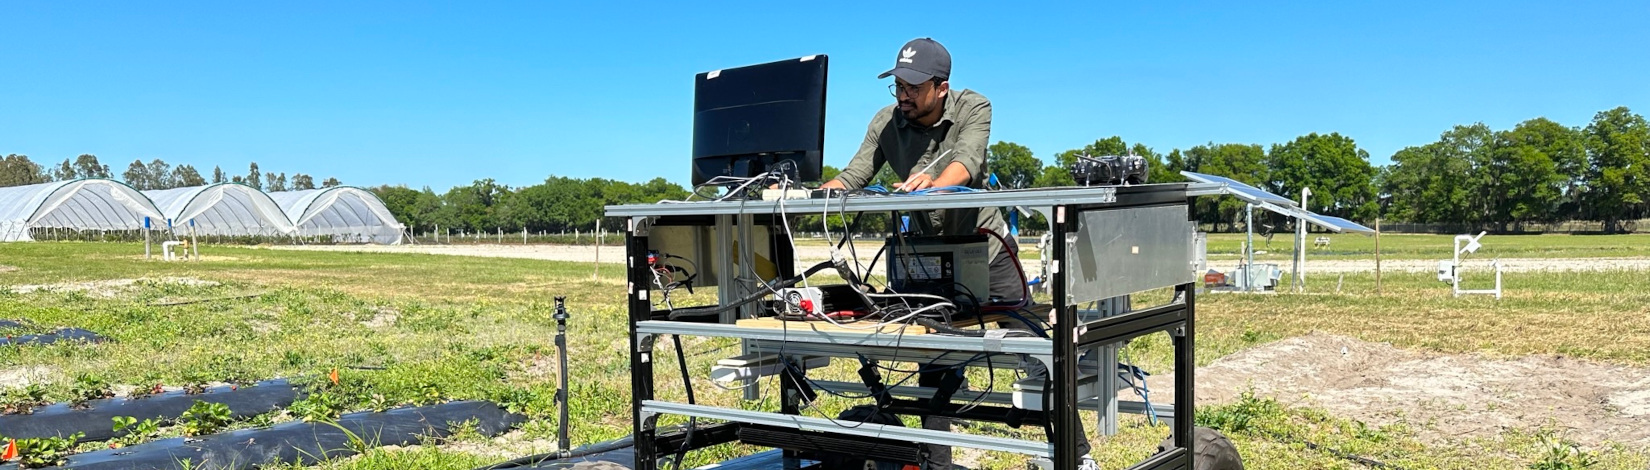 A person using a computer system out on the field.